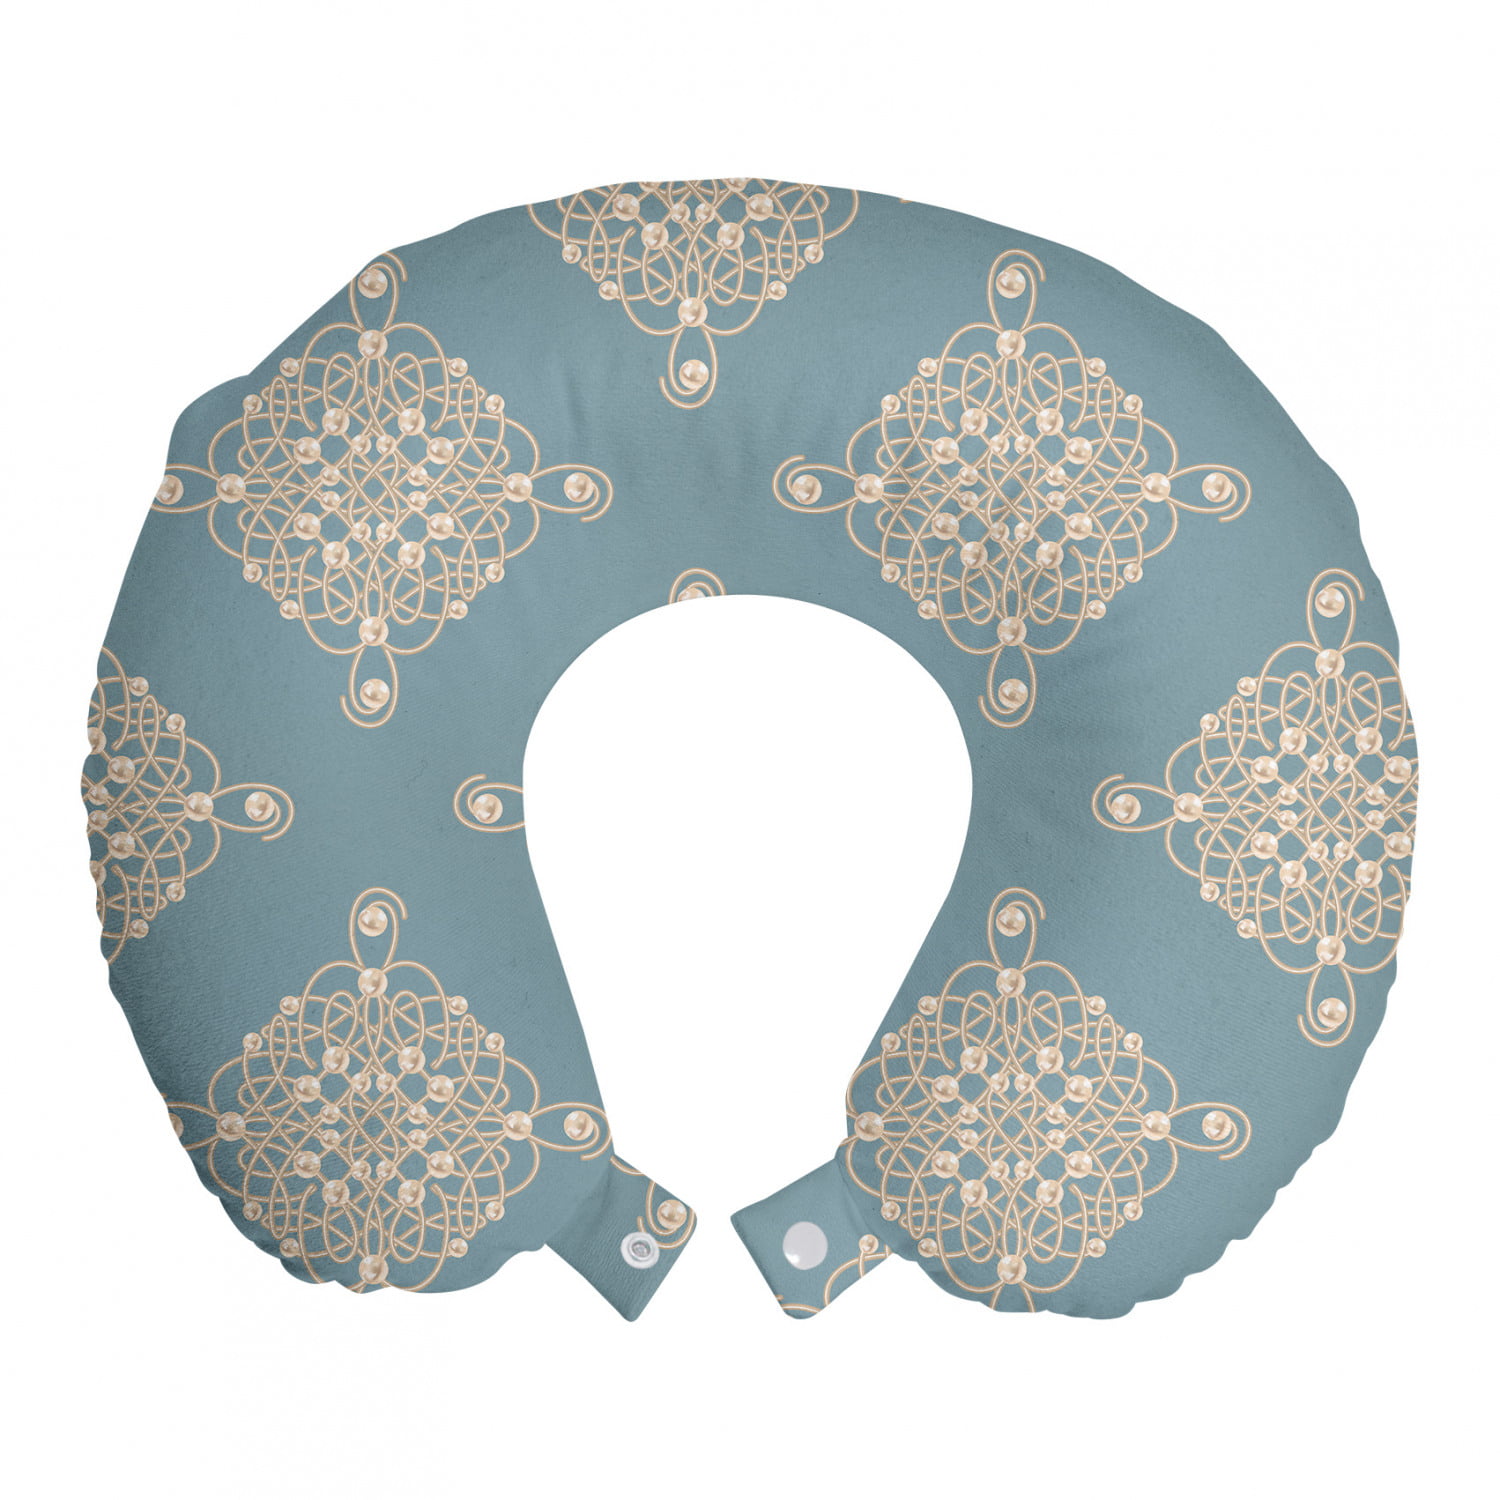 Pale Slate Blue Tan Abstract Swirled and Curved Lines Symmetrical Design Elements Vintage Royal Ambesonne Pearls Travel Pillow Neck Rest 12 Memory Foam Traveling Accessory for Airplane and Car 